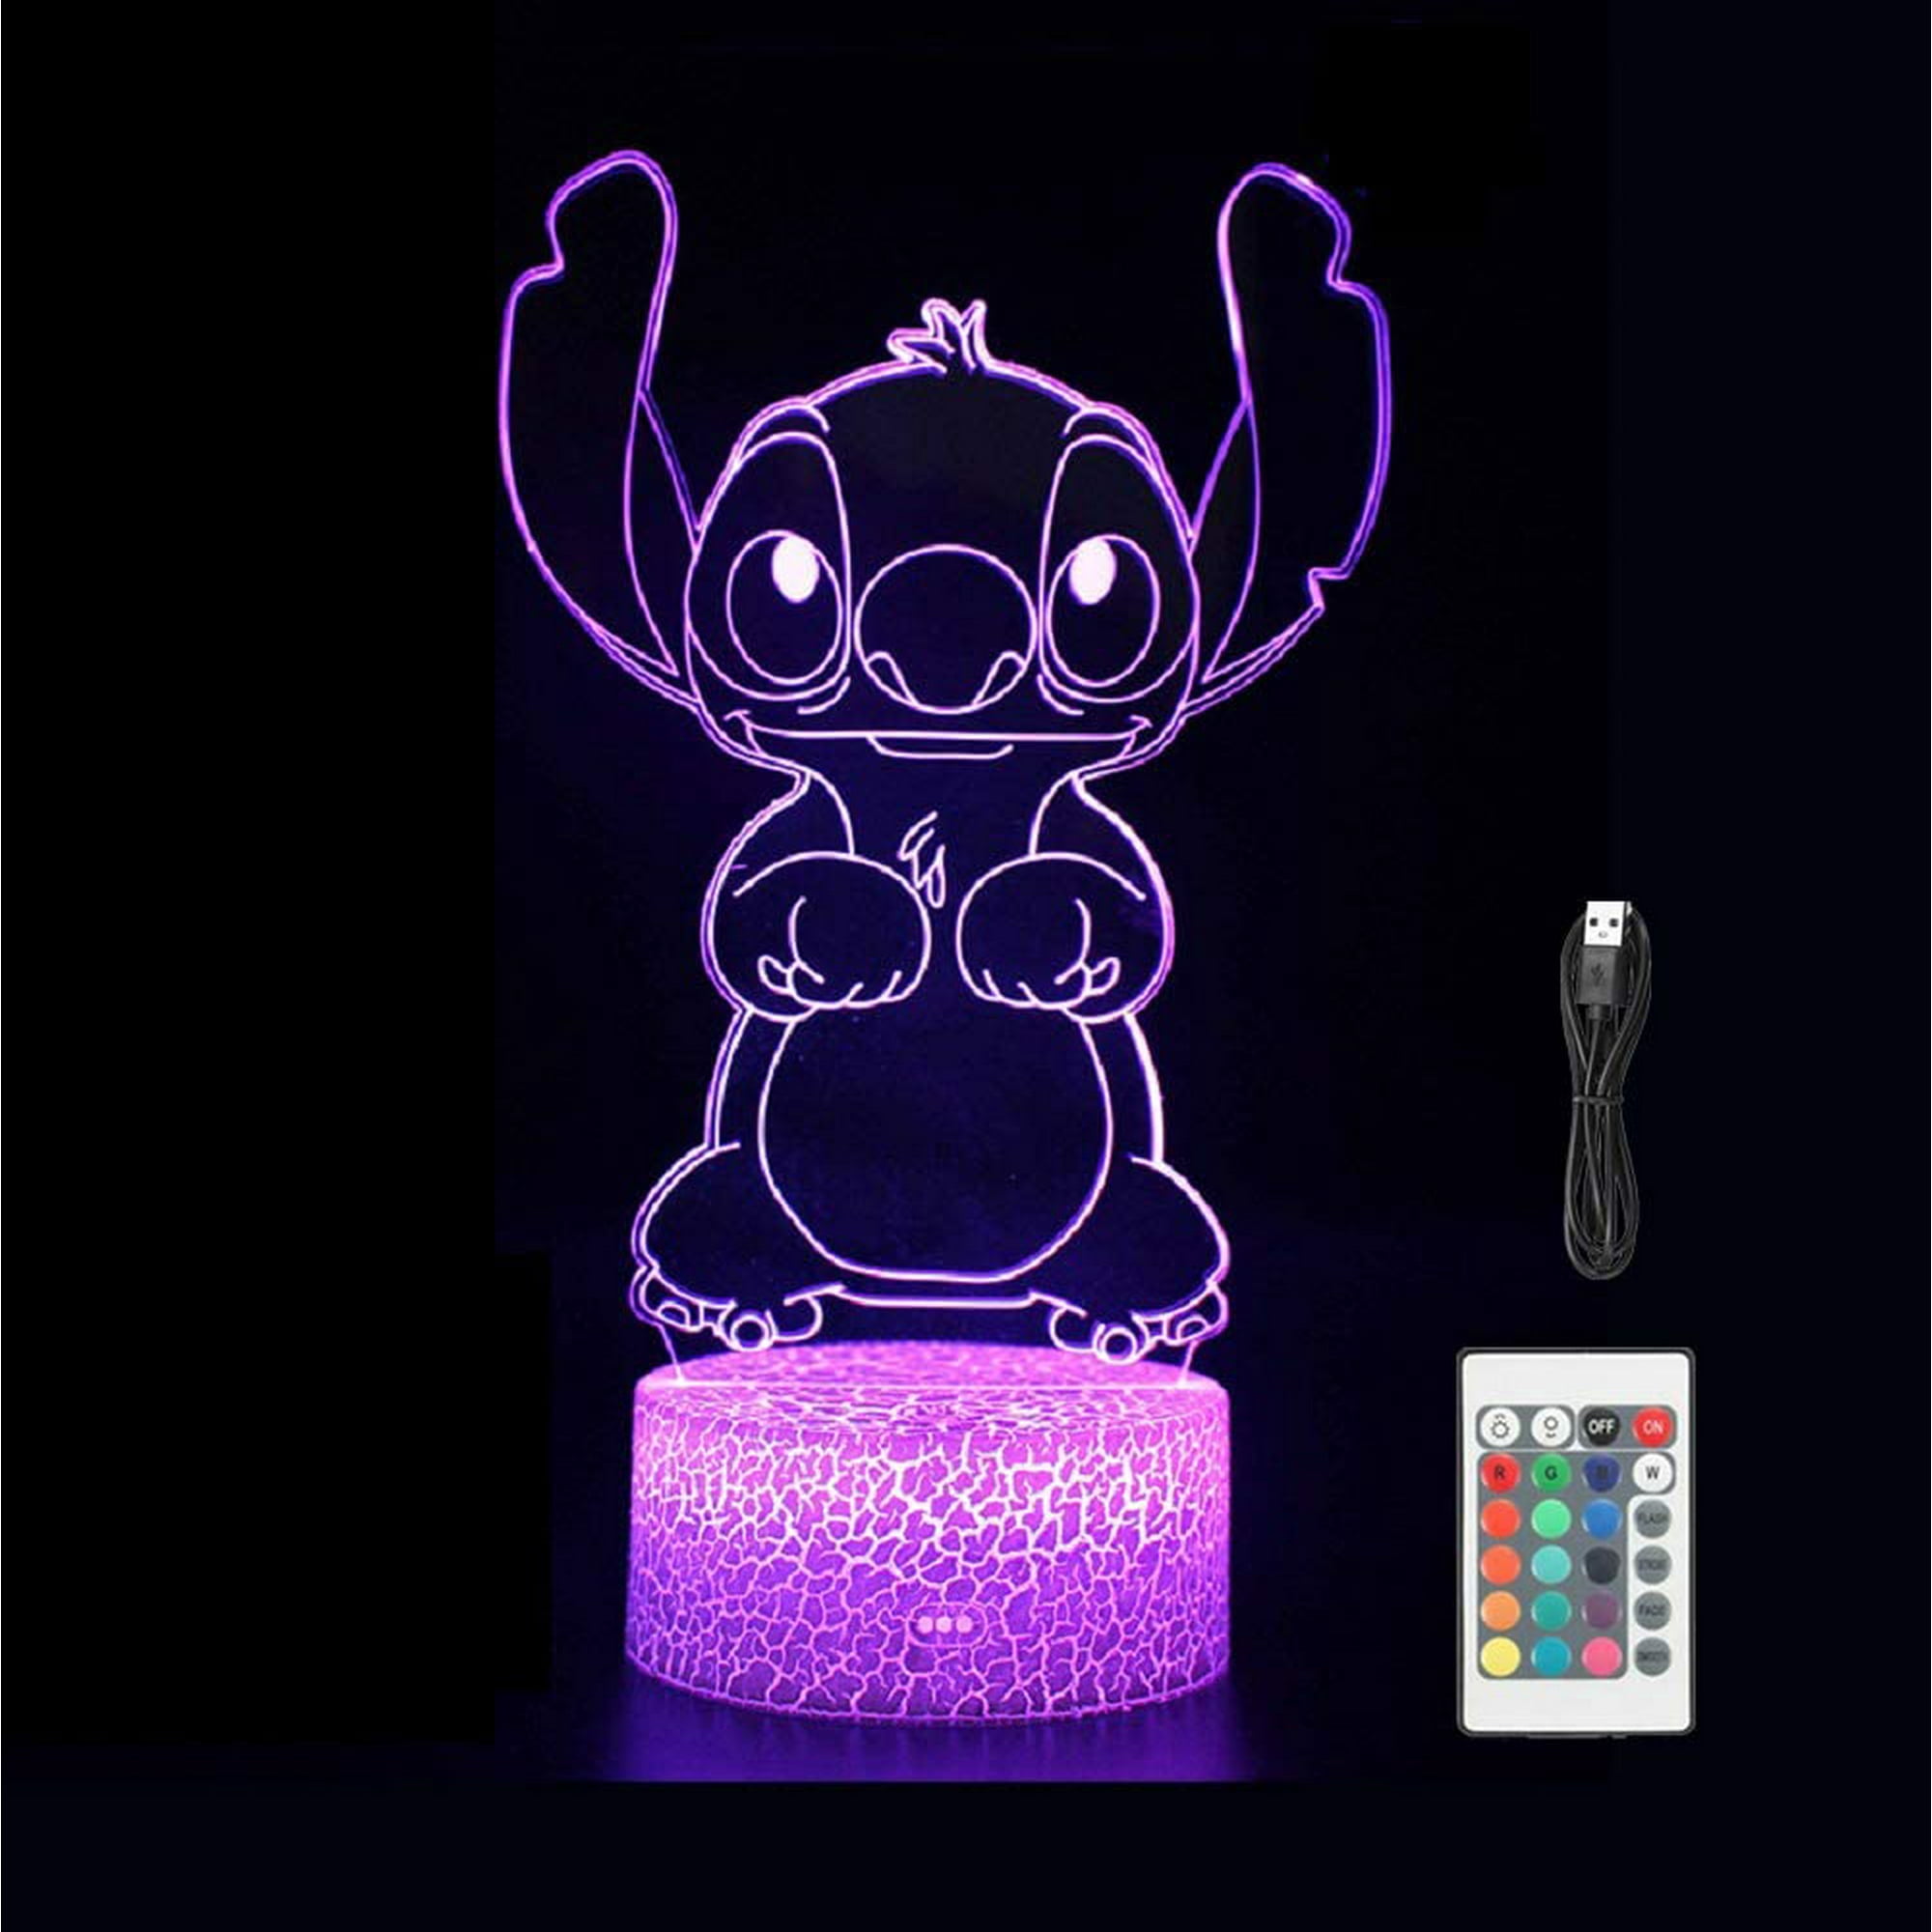 GIMFRY Stitch Night Light Cute Stitch Gifts for Girls 16 Colors Changing with Remote&Touch Models Room Decor Stitch Lamp Birthday Christmas Party